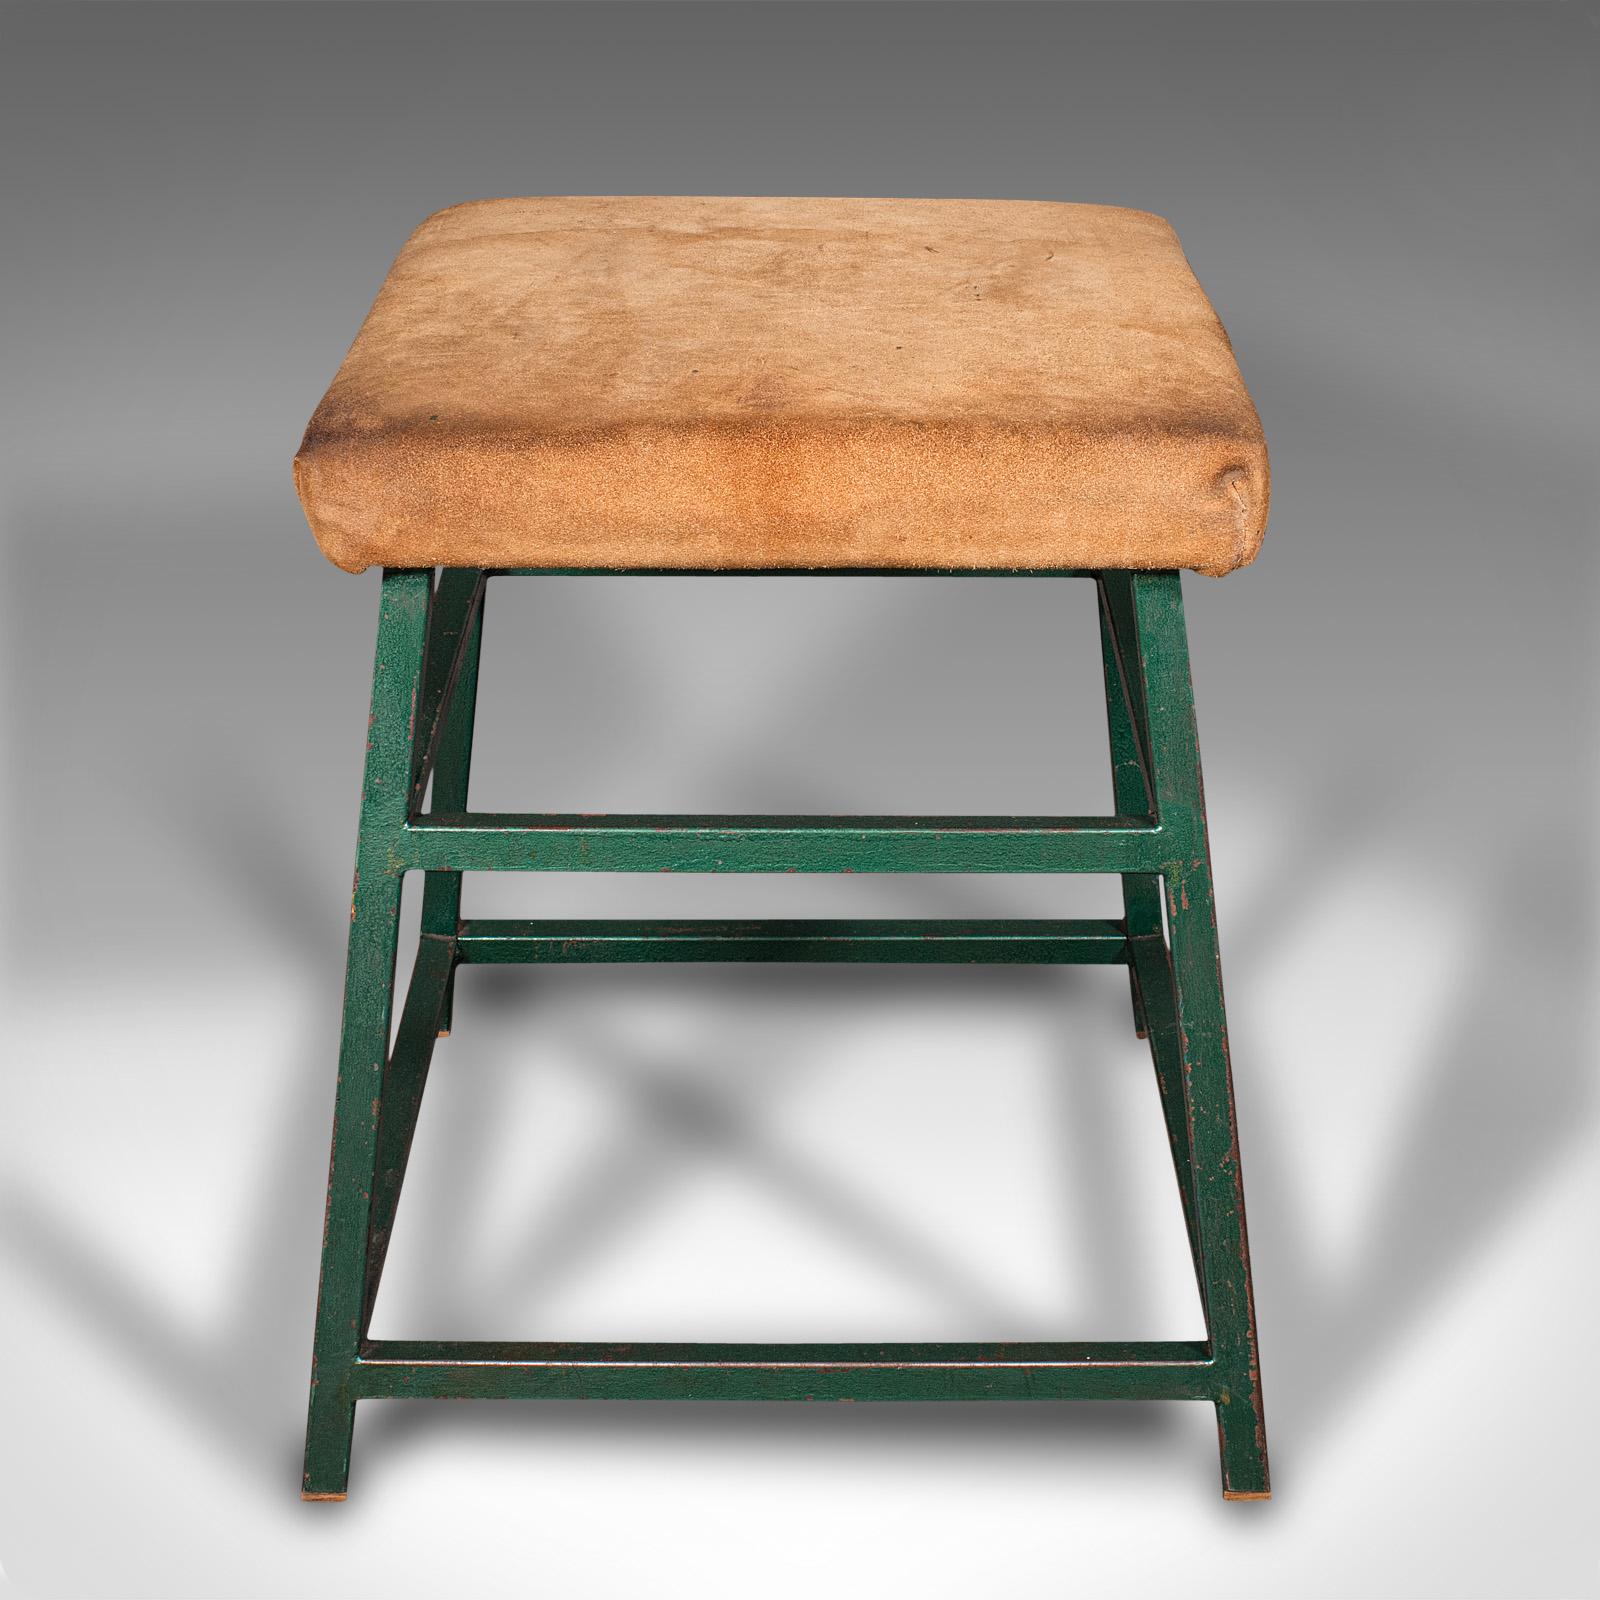 Large Vintage Industrial Lab Stool, English, Suede, Kitchen, Office Seat, C.1950 In Good Condition For Sale In Hele, Devon, GB